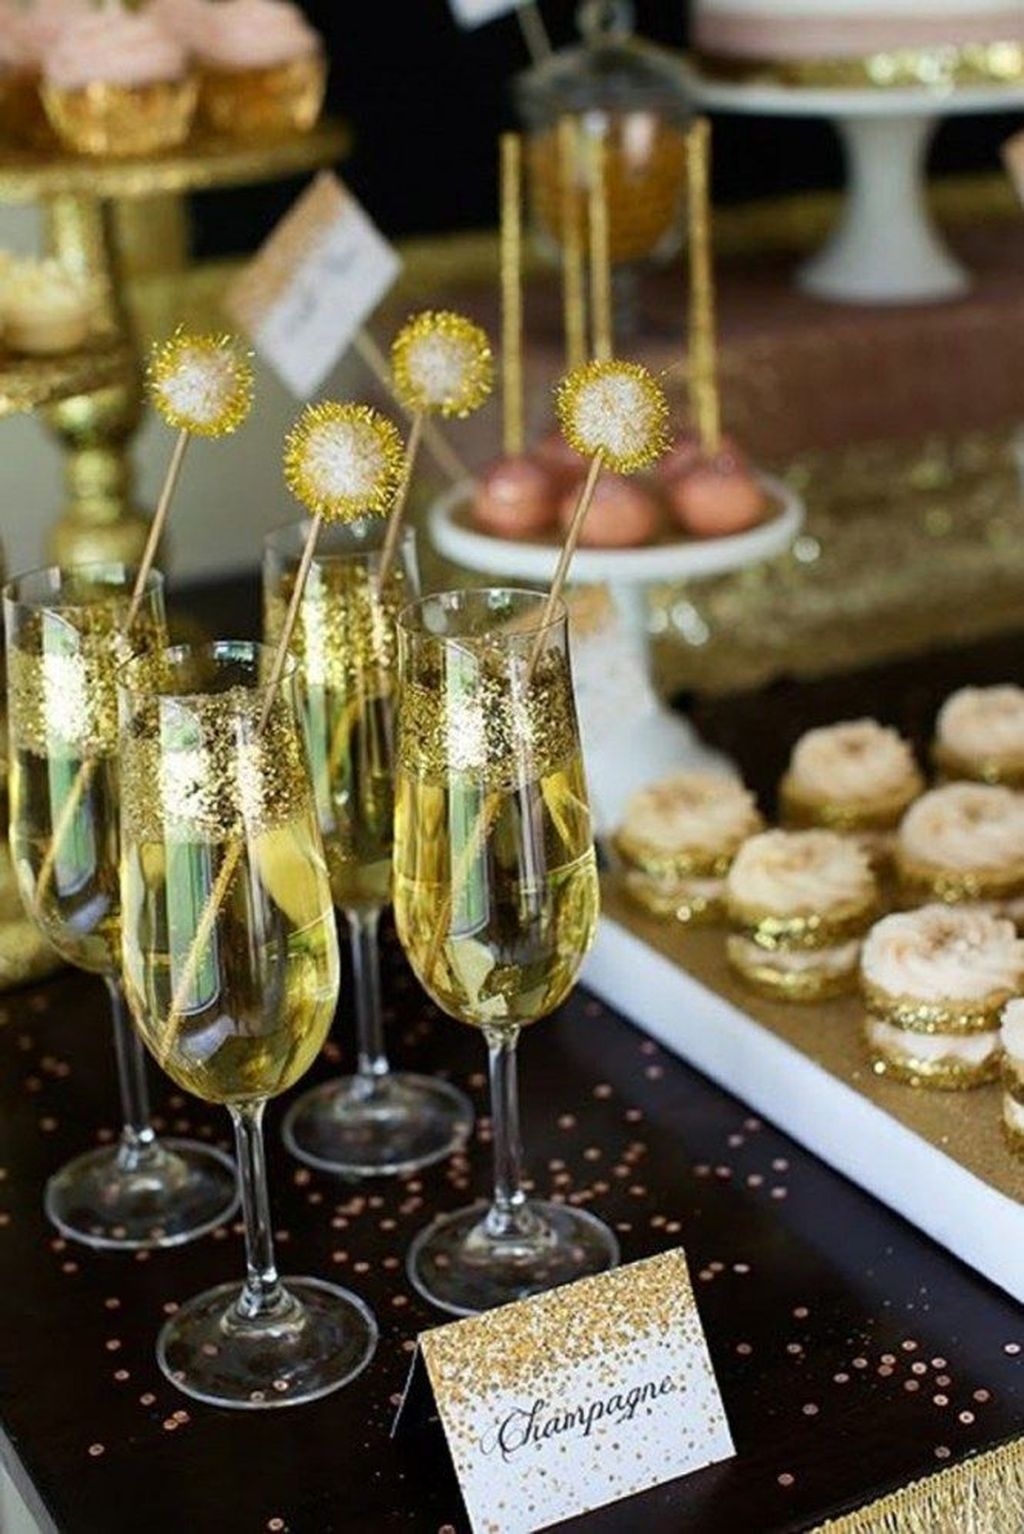 Best Decoration Ideas Of New Year's Eve Party At Home 26